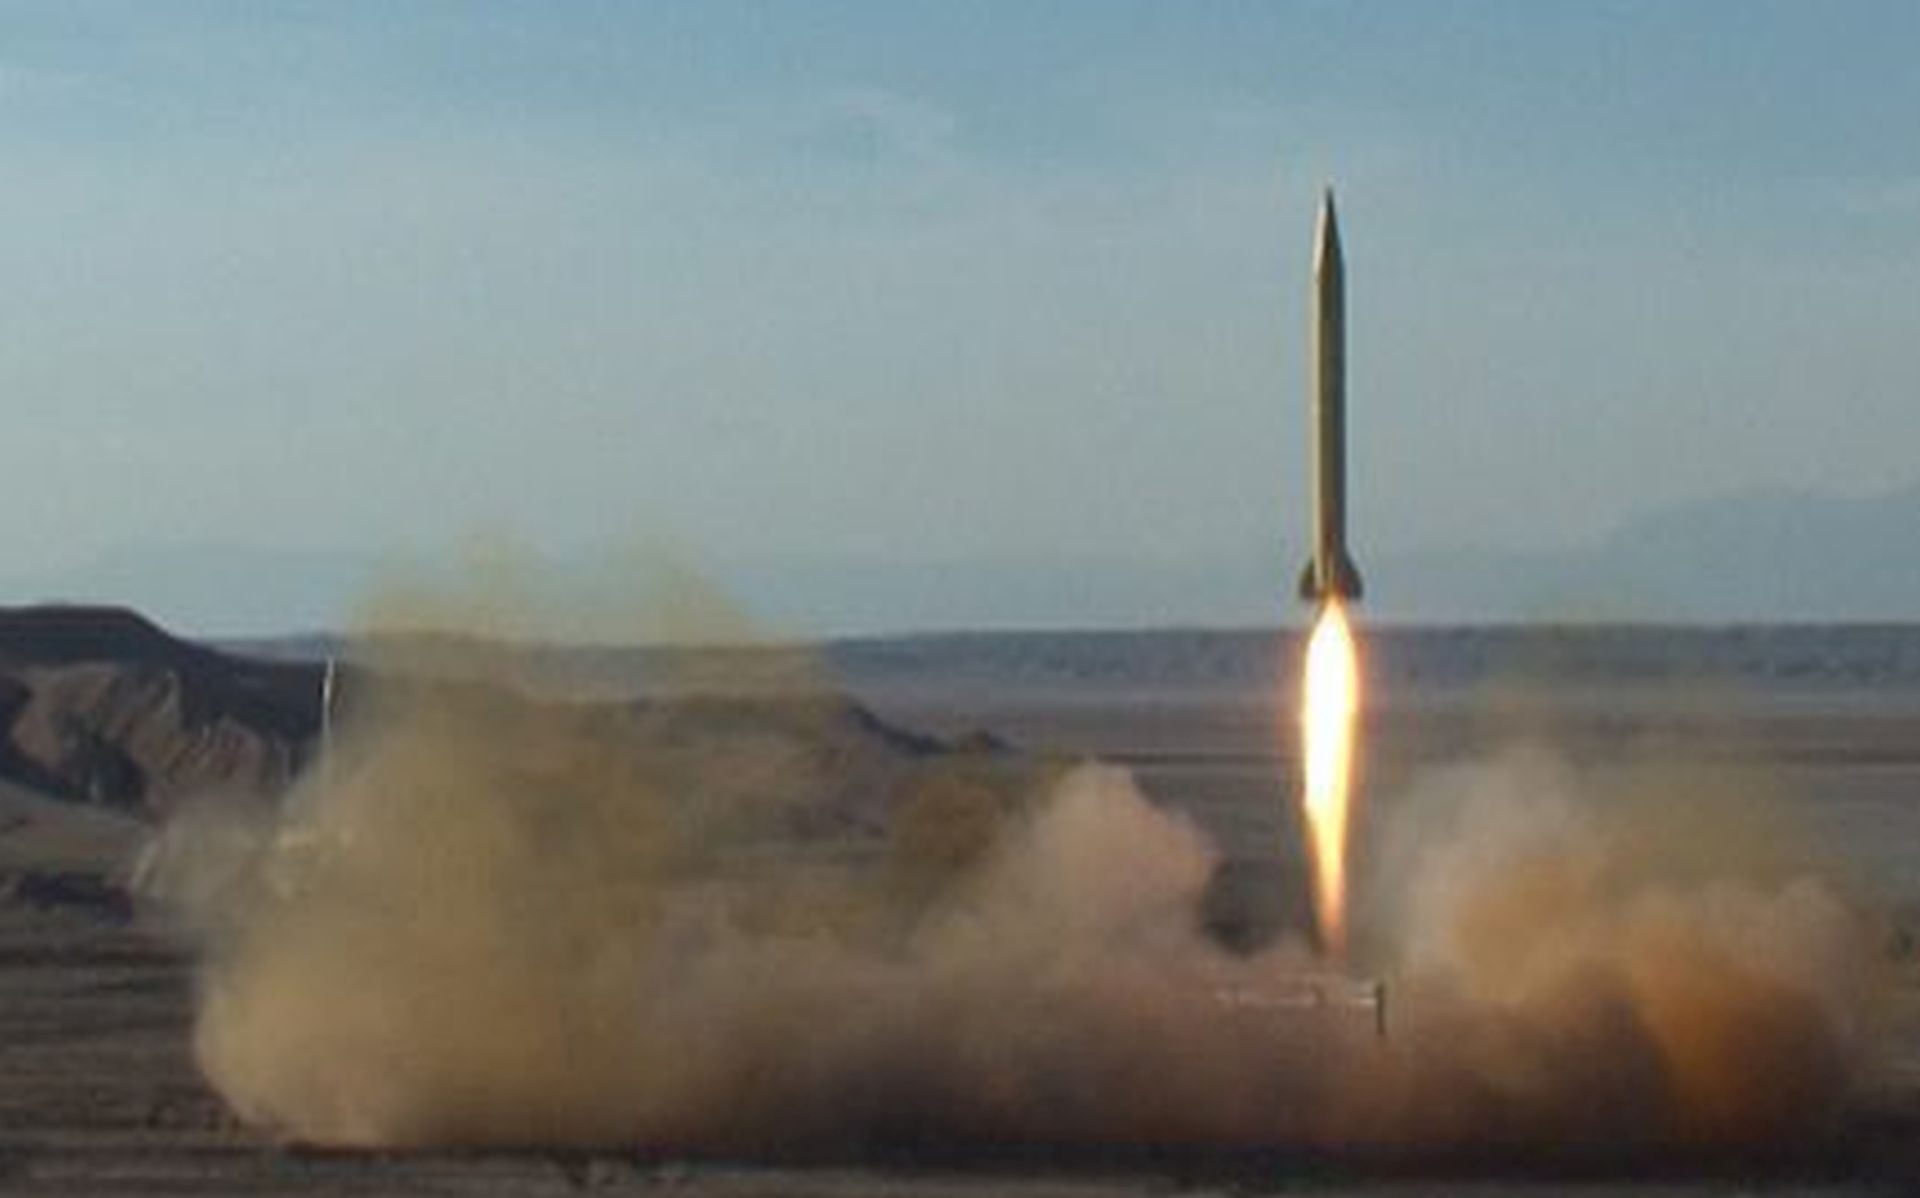 epa05201877 A handout picture made available by the Iranian defence ministry official website shows, an Iranian ballistic missile launch at an undisclosed location, in Iran, on 08 March 2016. Media reported that Iran has tested ballistic missiles again. Several missiles were successfully tested in various parts of the country on 08 March 2016.  EPA/DEFENCE MINISTRY OFFICIAL WEBSITE / HANDOUT  HANDOUT EDITORIAL USE ONLY/NO SALES